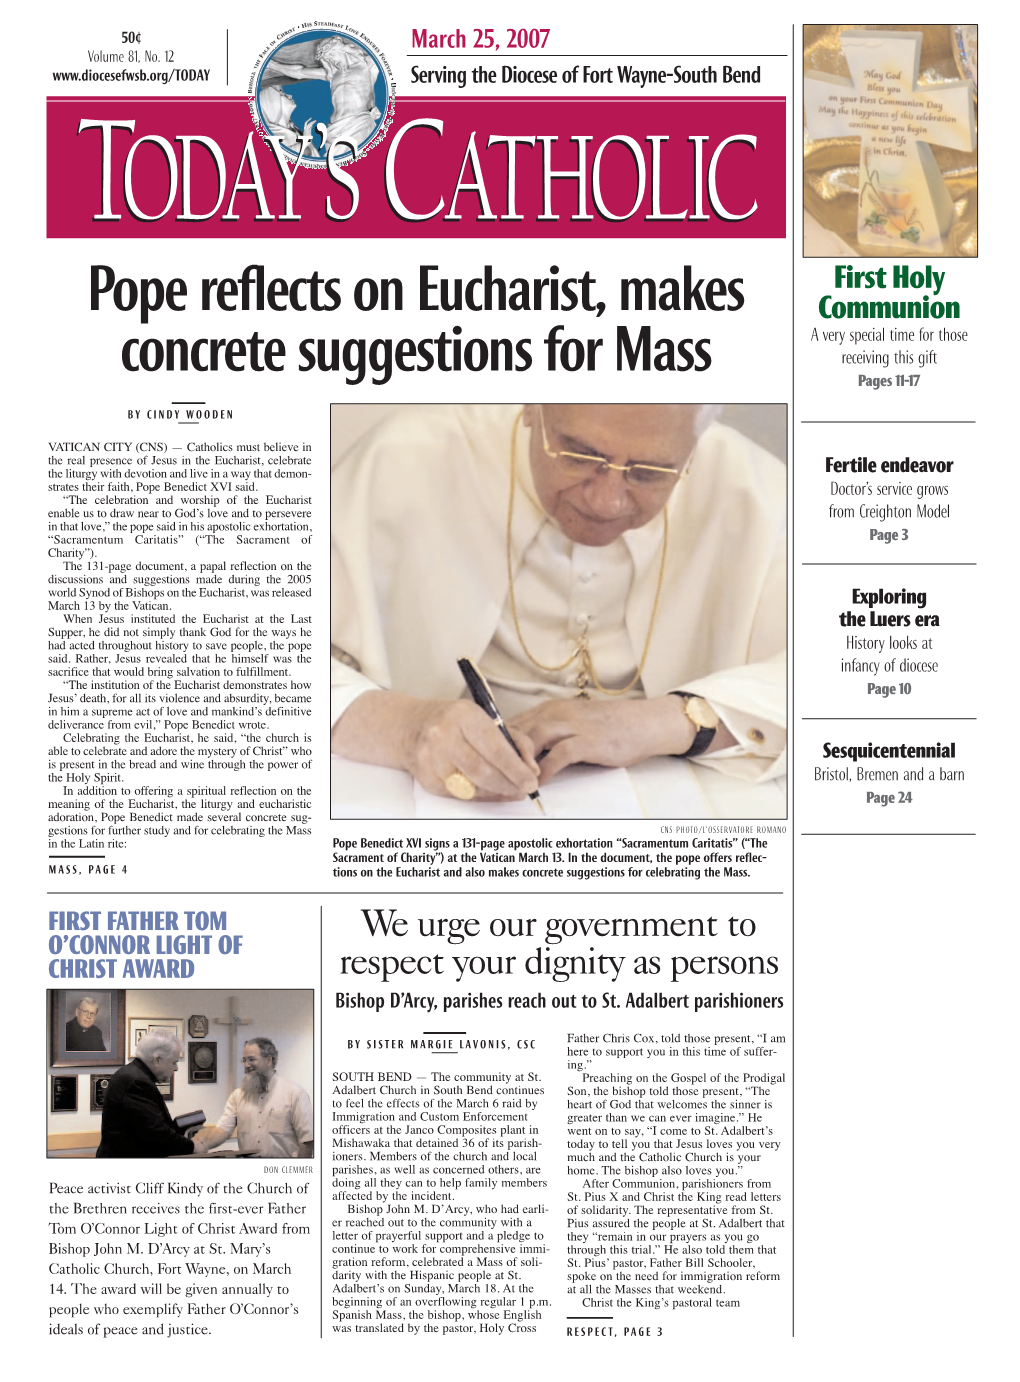 Pope Reflects on Eucharist, Makes Concrete Suggestions for Mass